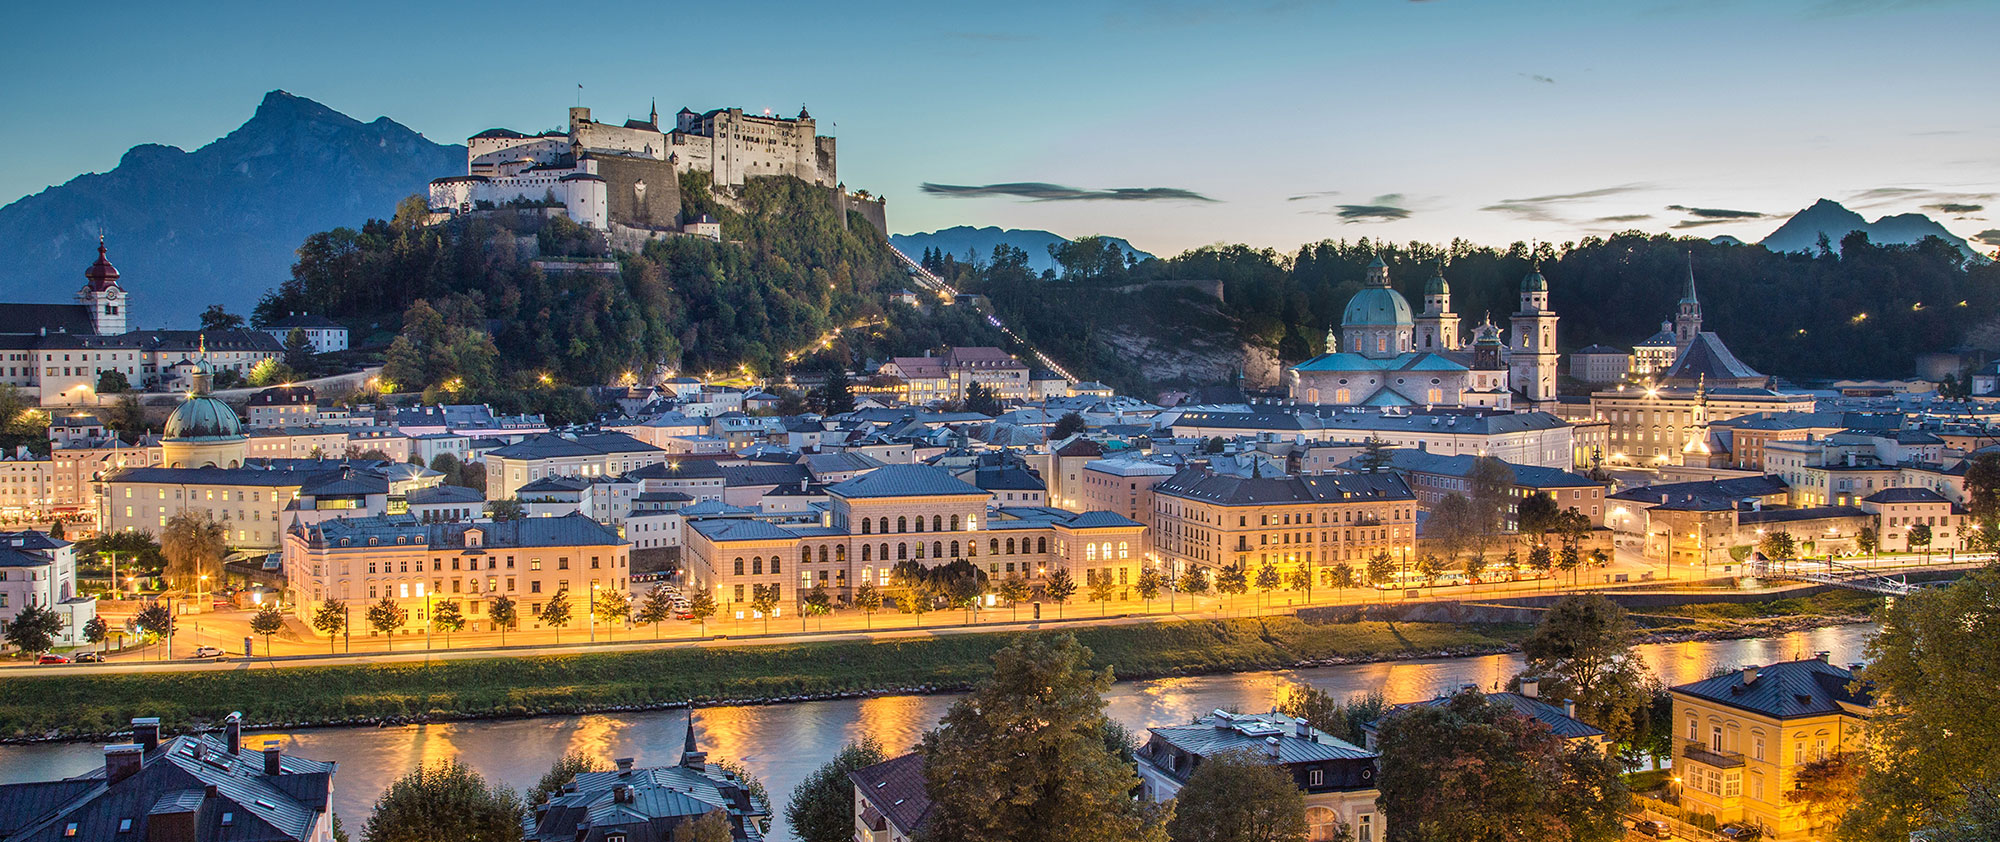 The blue hour in Salzburg, the City of Mozart